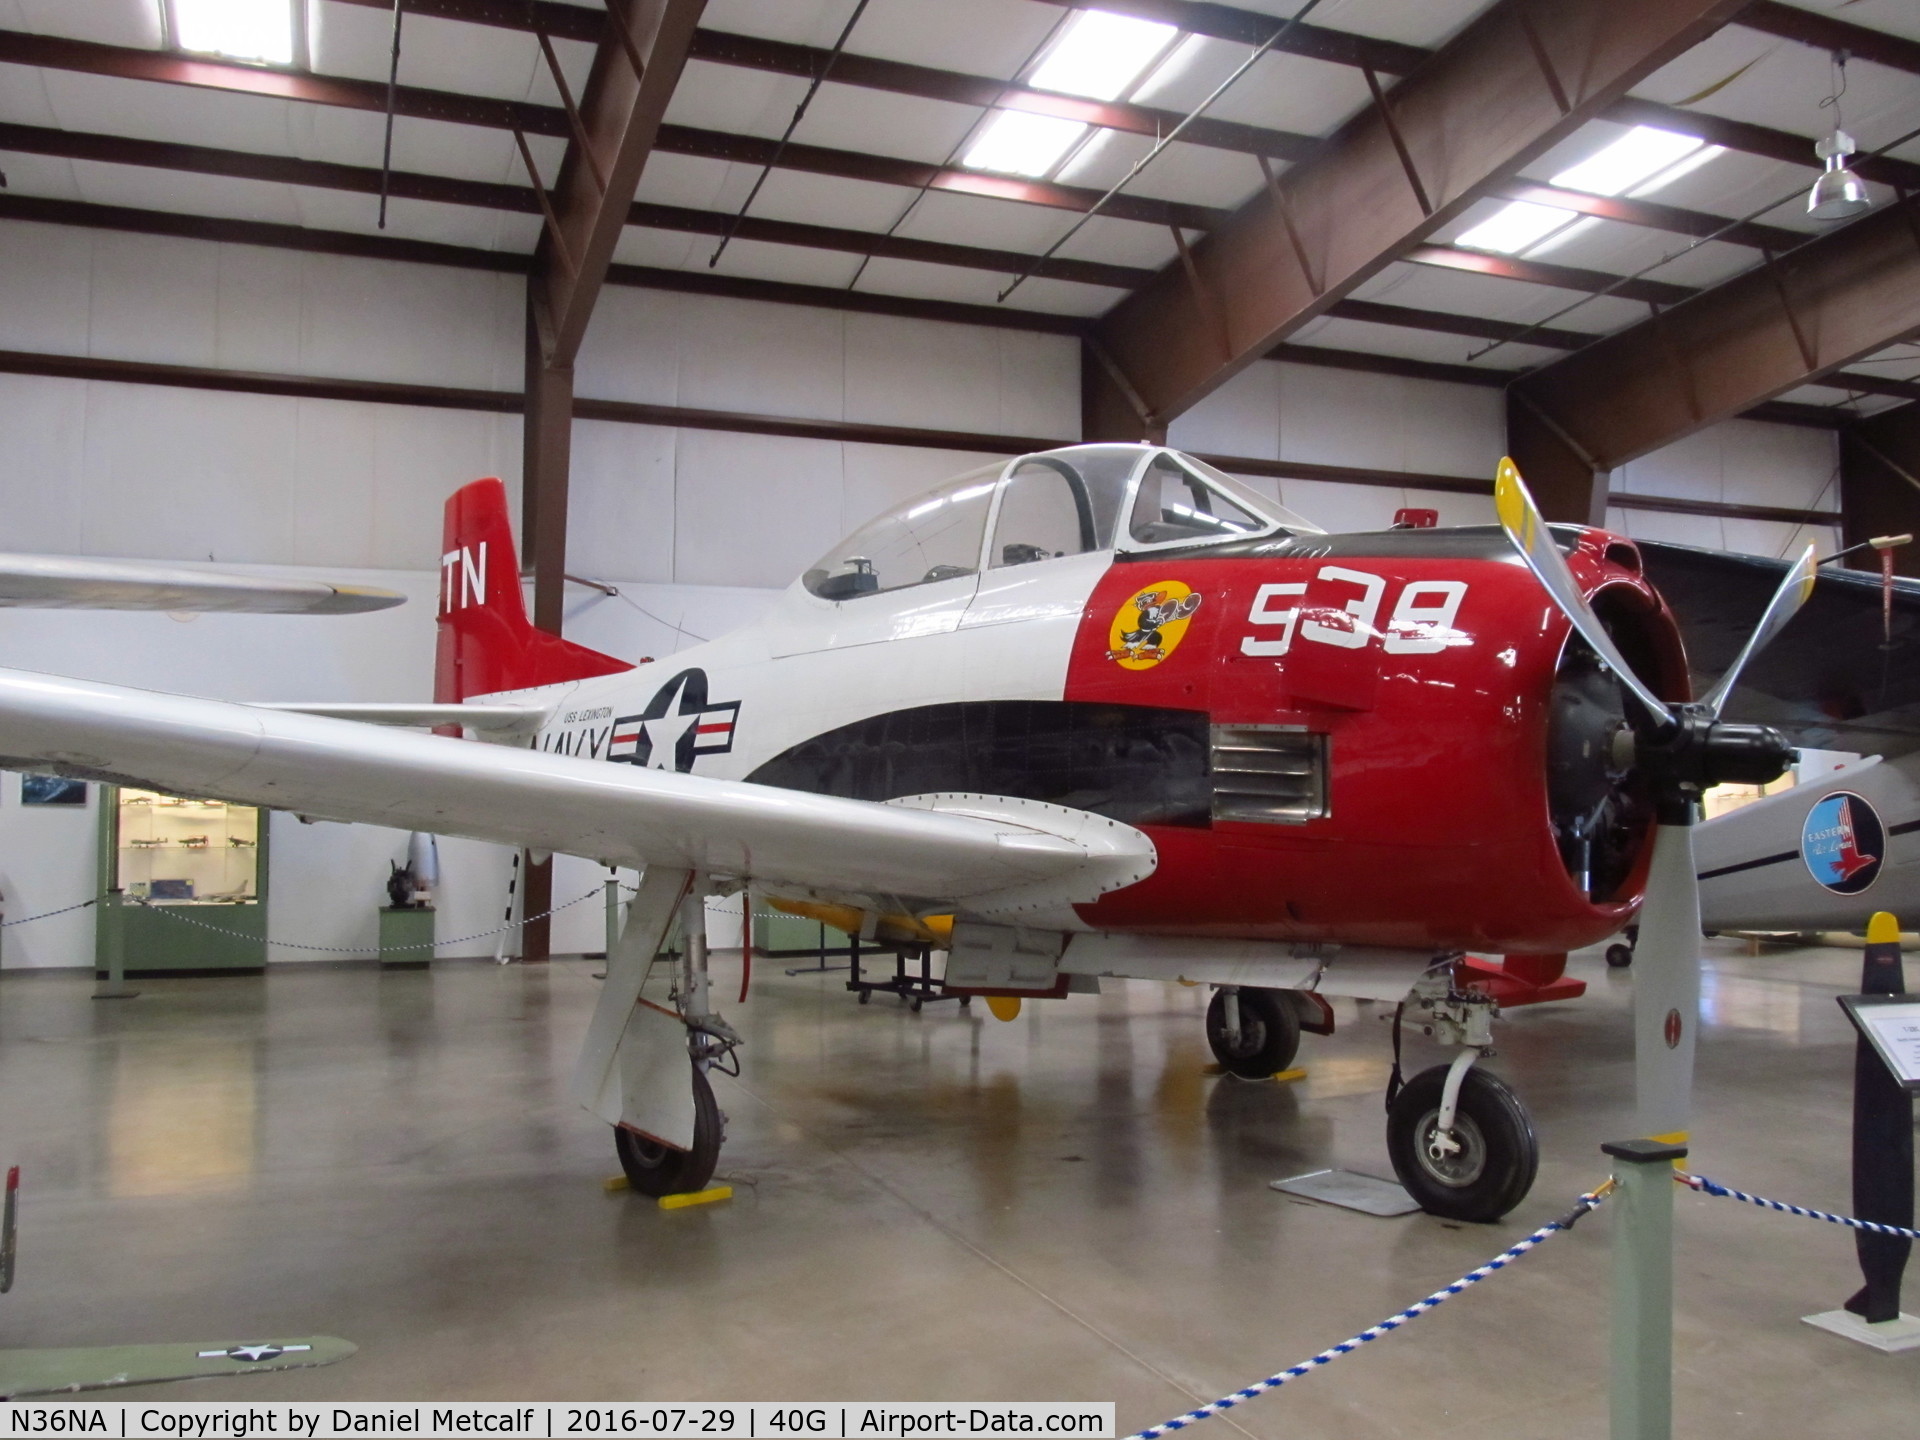 N36NA, 1954 North American T-28C Trojan C/N 226-116 (140539), Planes of Fame Air Museum (Valle-Williams, AZ Location)